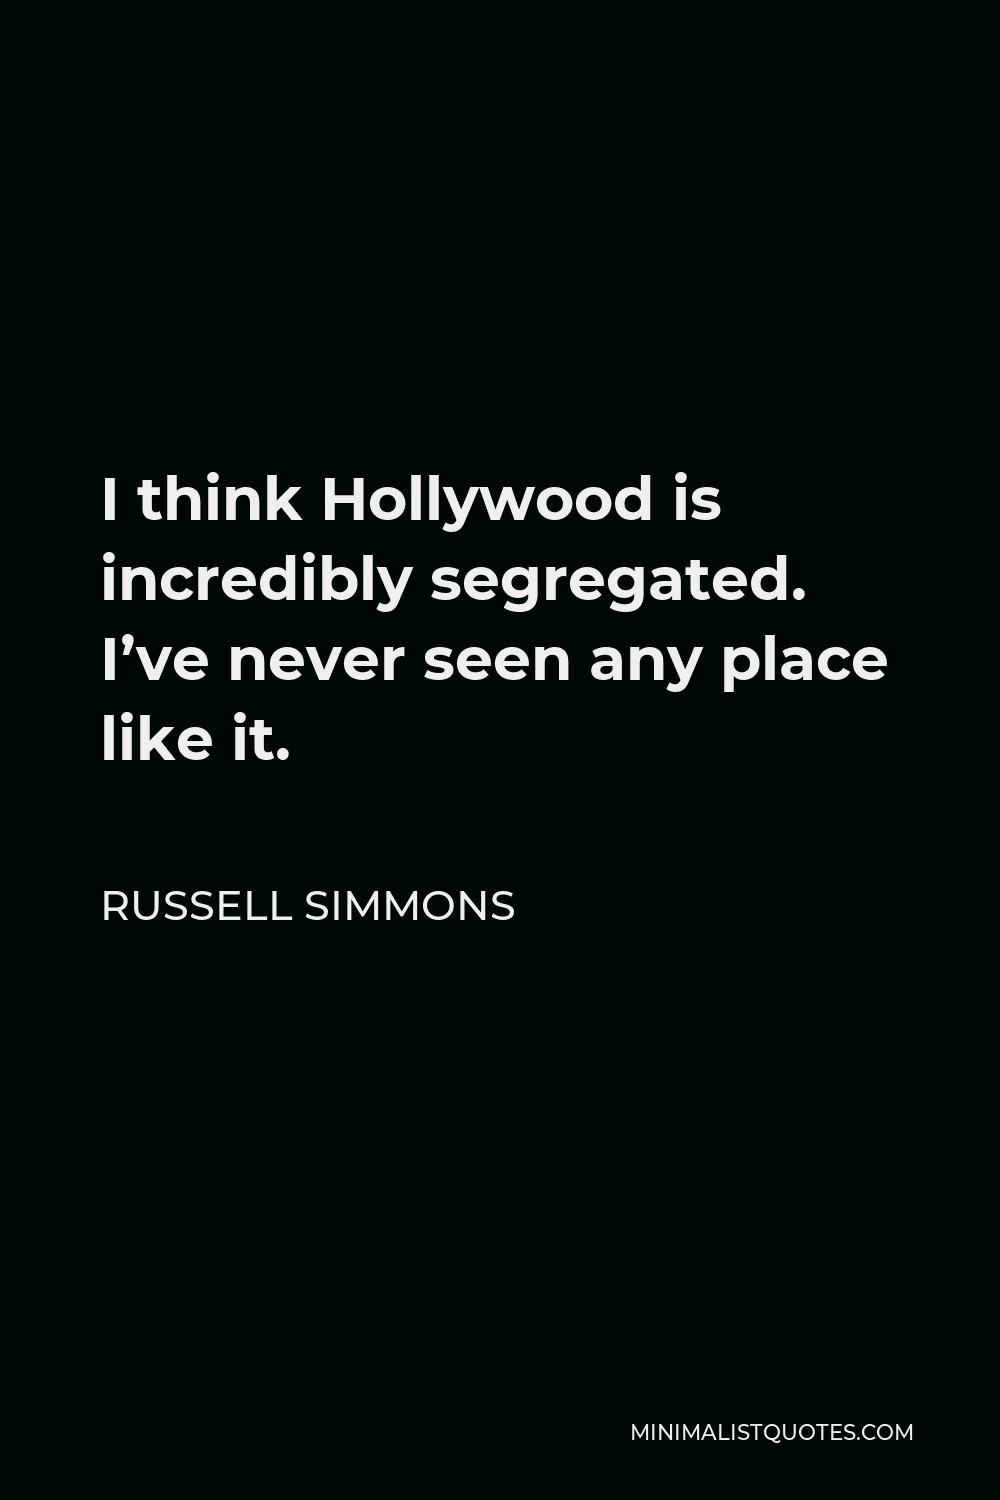 Russell Simmons Quote - I think Hollywood is incredibly segregated. I’ve never seen any place like it.